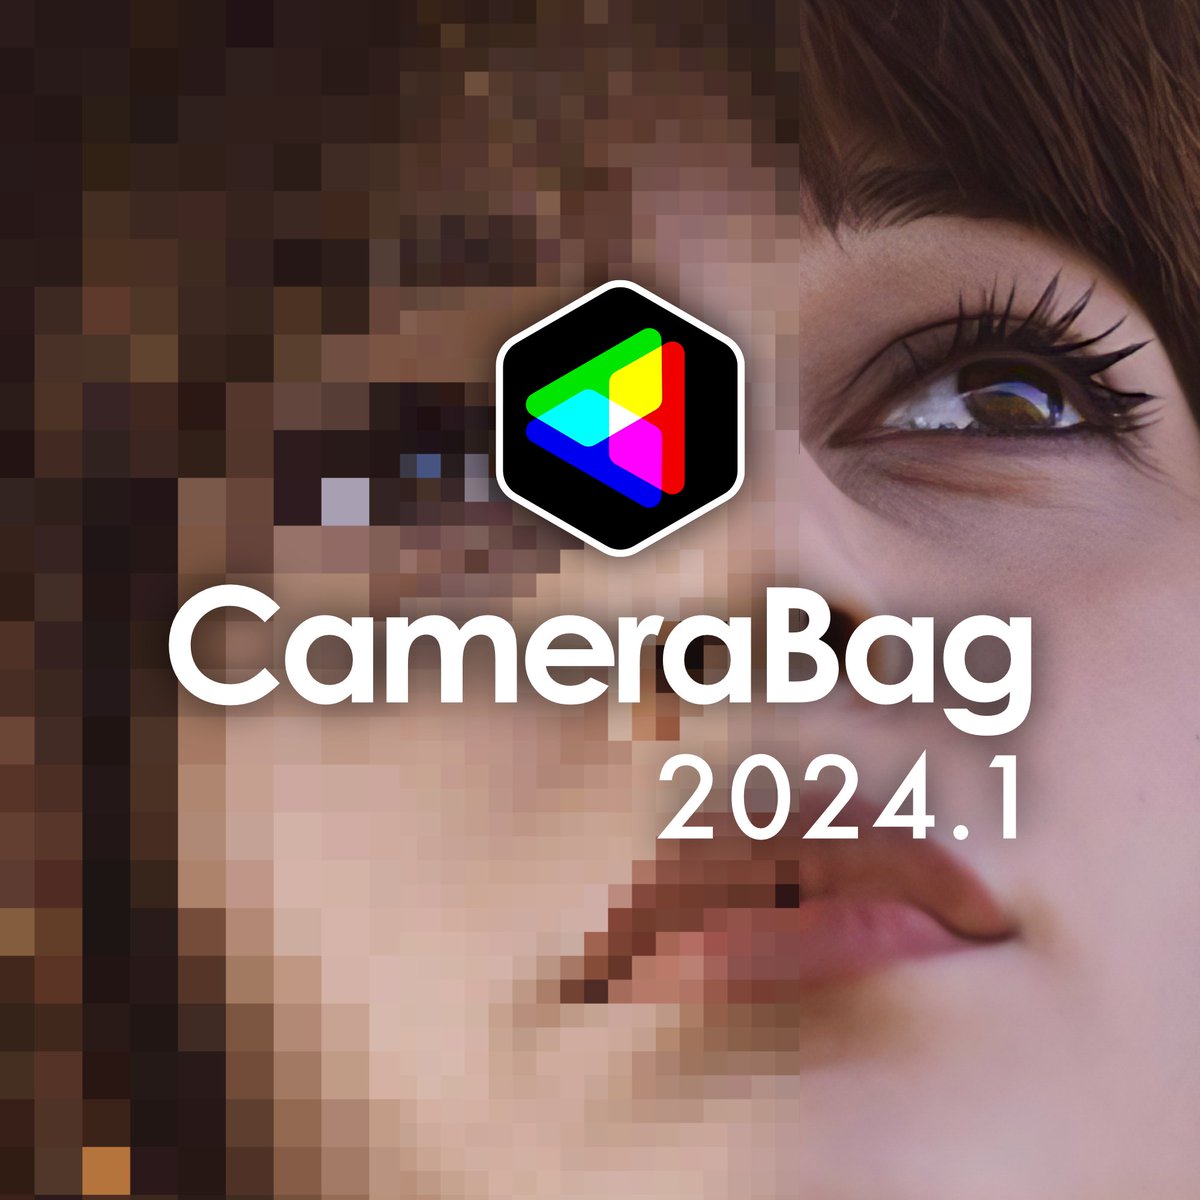 CameraBag 2024.1 is here with a powerful and extremely useful new tool: AI upscaling! Grab the update and check out the video below for details on how it works. Update/free trial nevercenter.com/camerabag Video: youtu.be/fVmrJVNG7Tk #photography #photoedit #videoediting